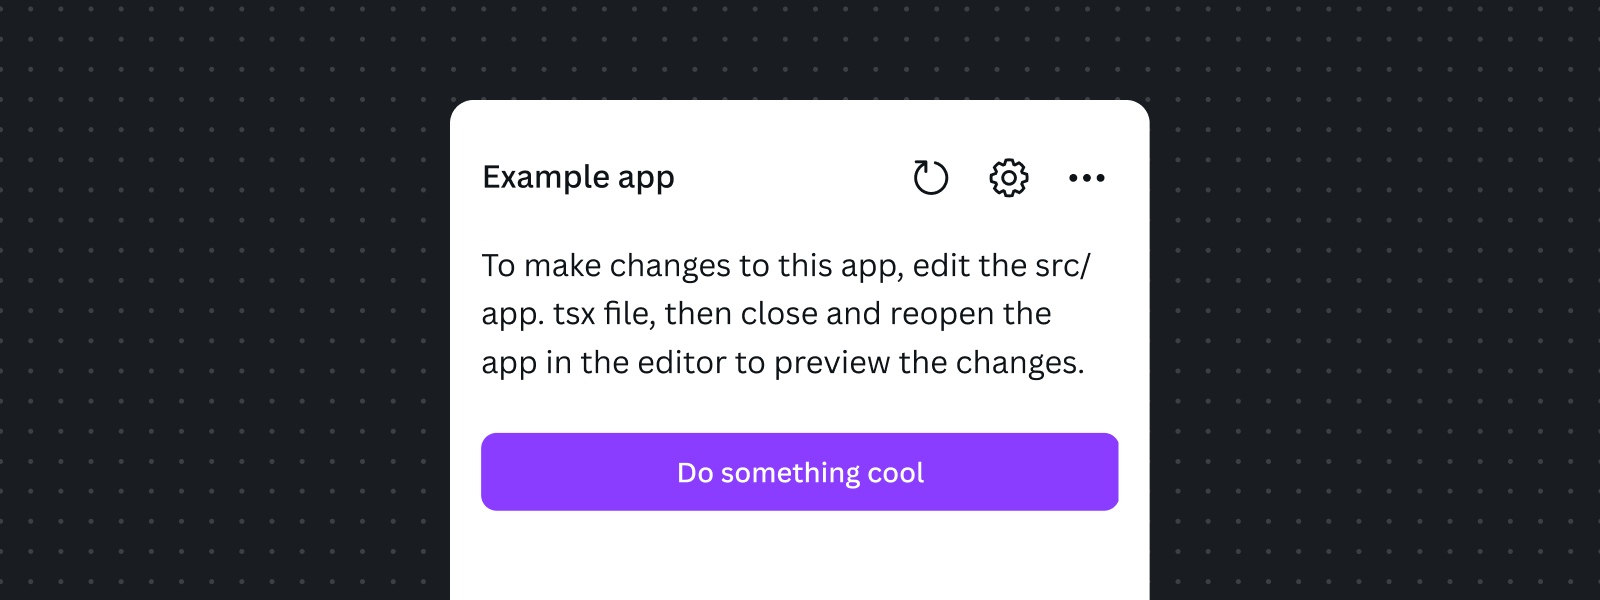 Preview of the app running locally, with a button saying "Do something cool"